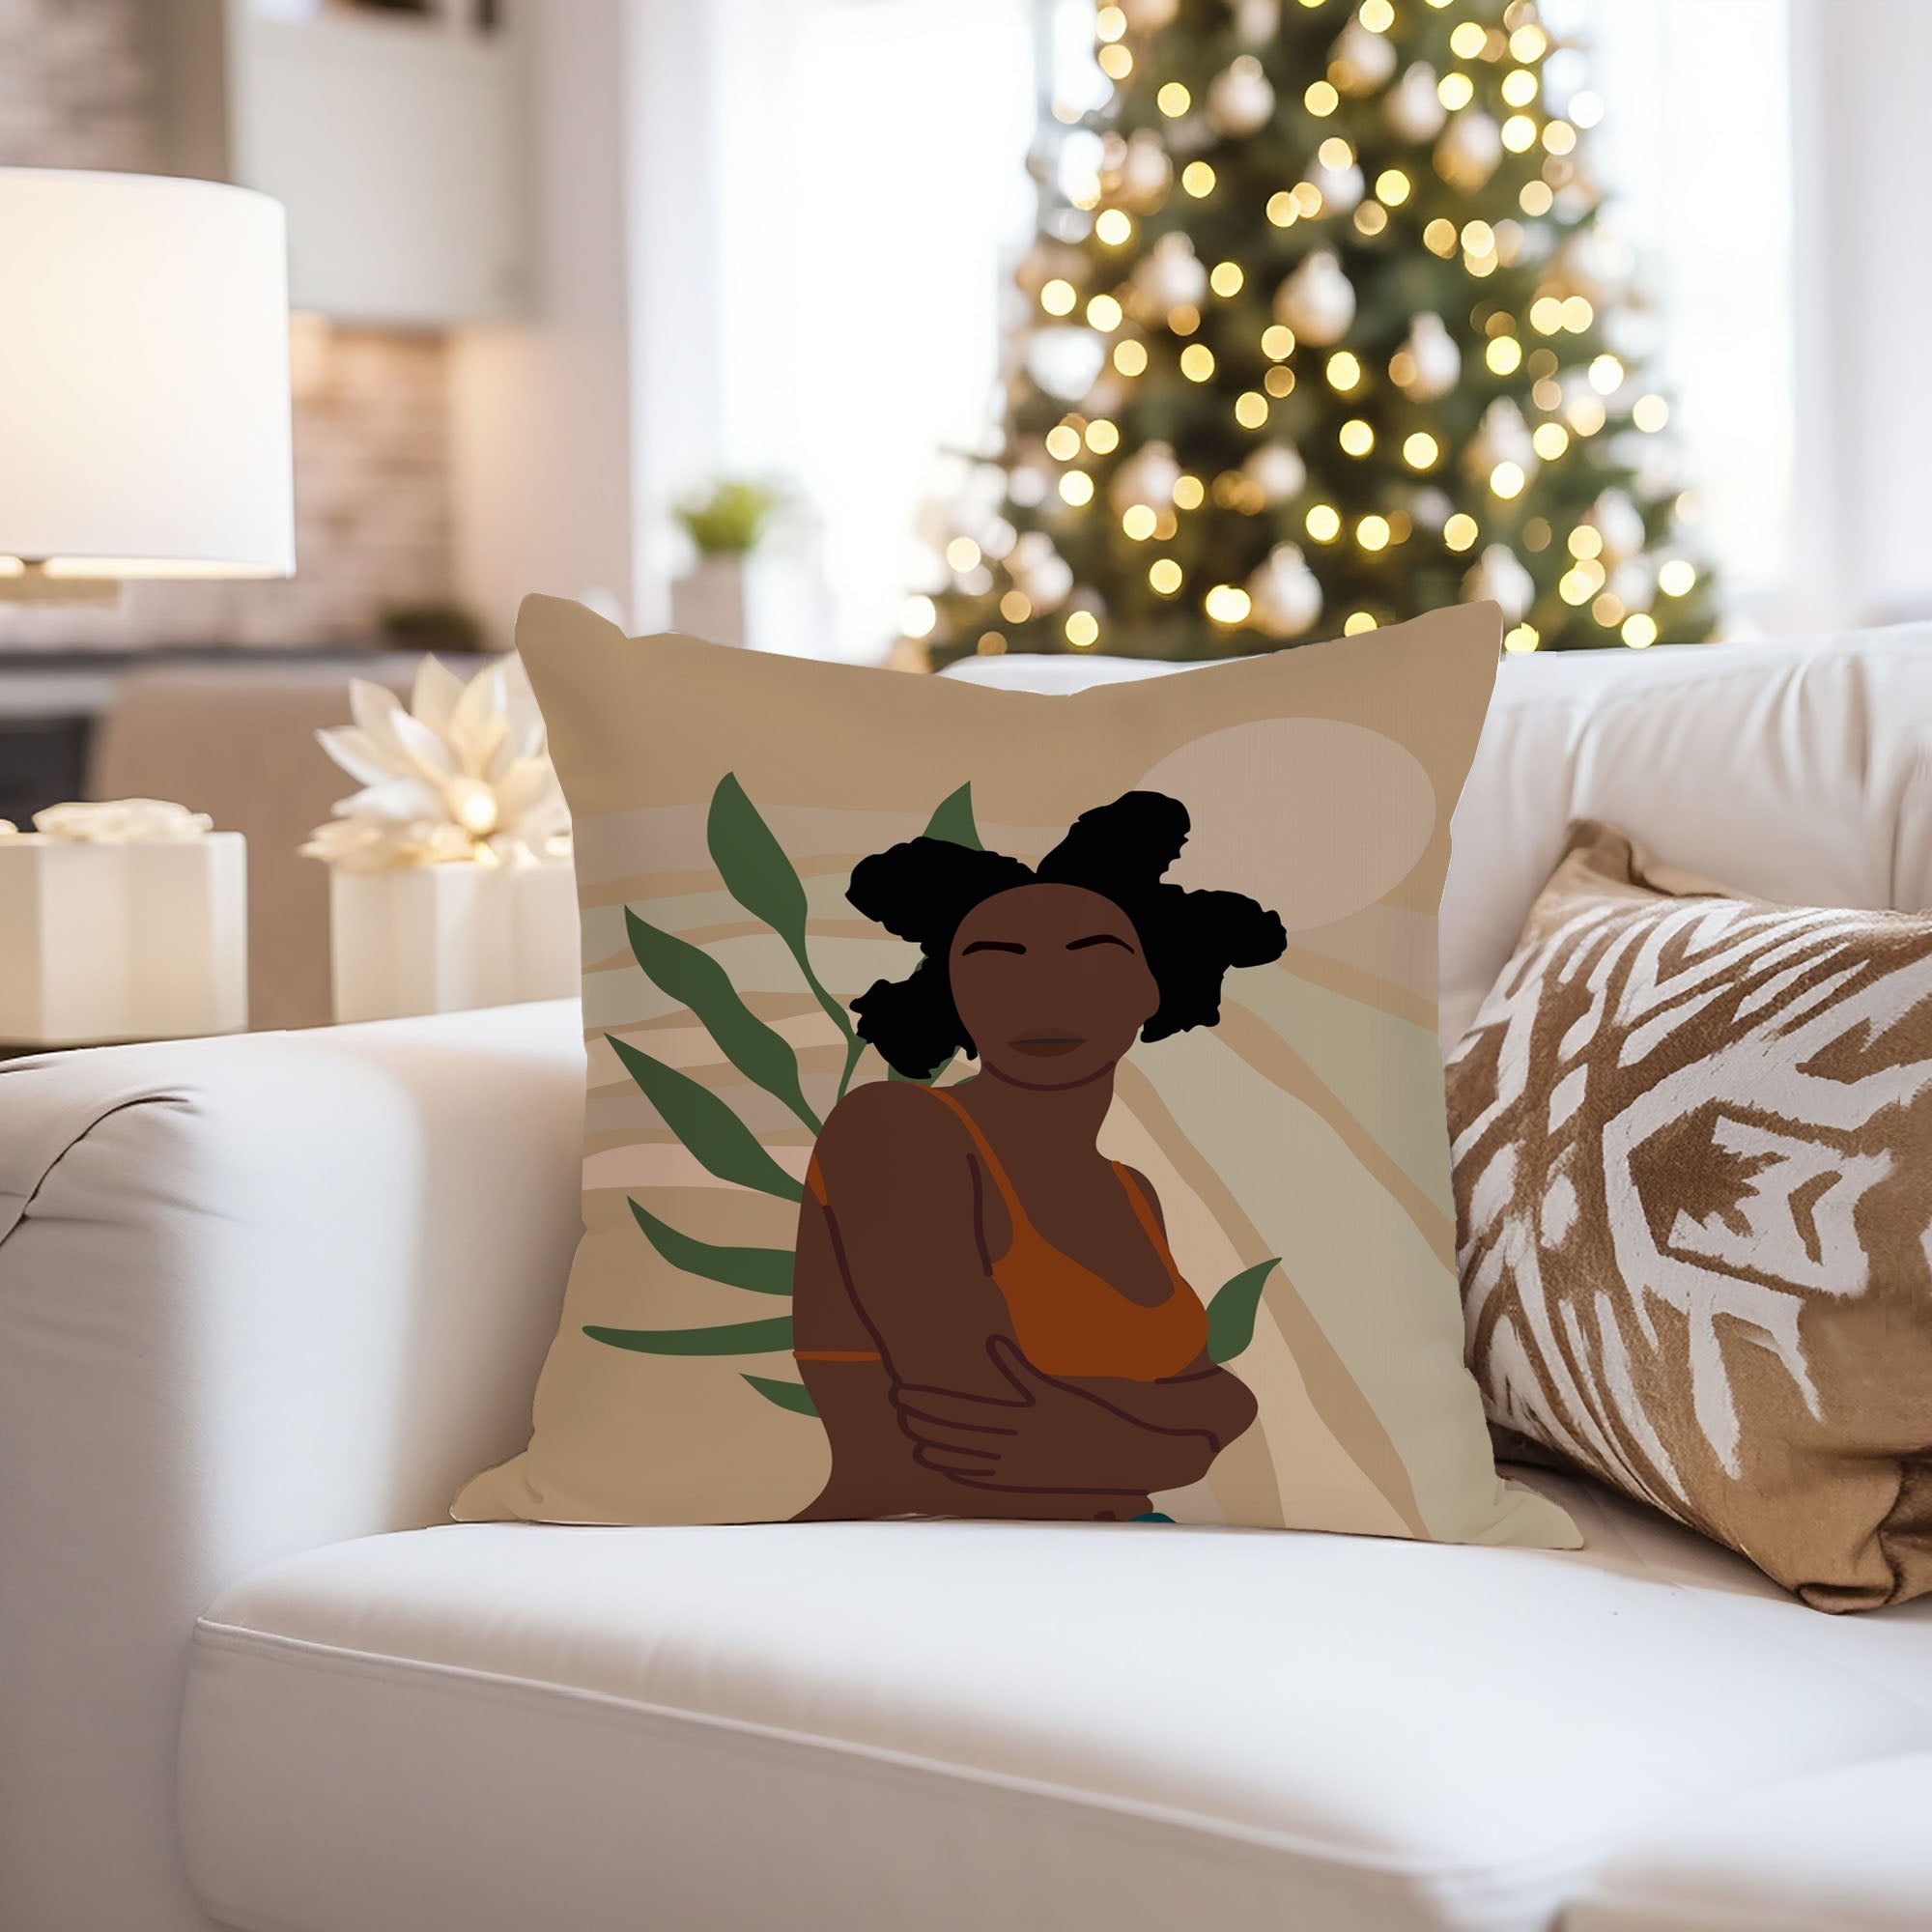 Ethan Taylor People & Portraits Throw Pillow Soft Cushion Cover African American Women Divinely Made Portraits Female Bohemian Decorative Square Accent Pillow Case, 18x18 Inches, Blue, Green - image 4 of 5